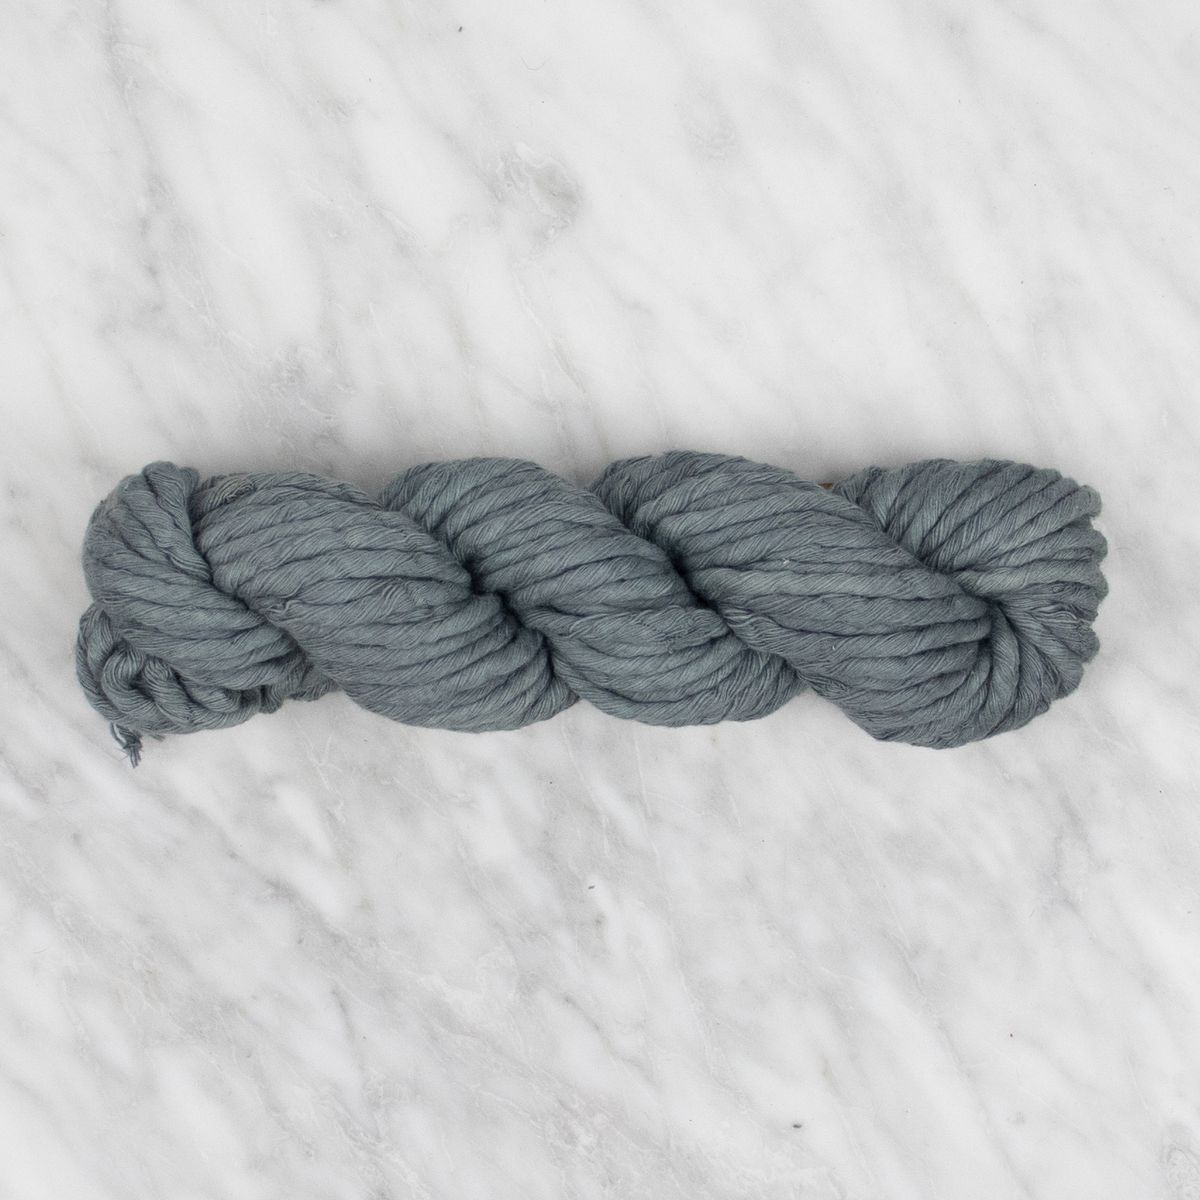 5mm Hand-Dyed Cotton String - Shadow Grey - 100 grams